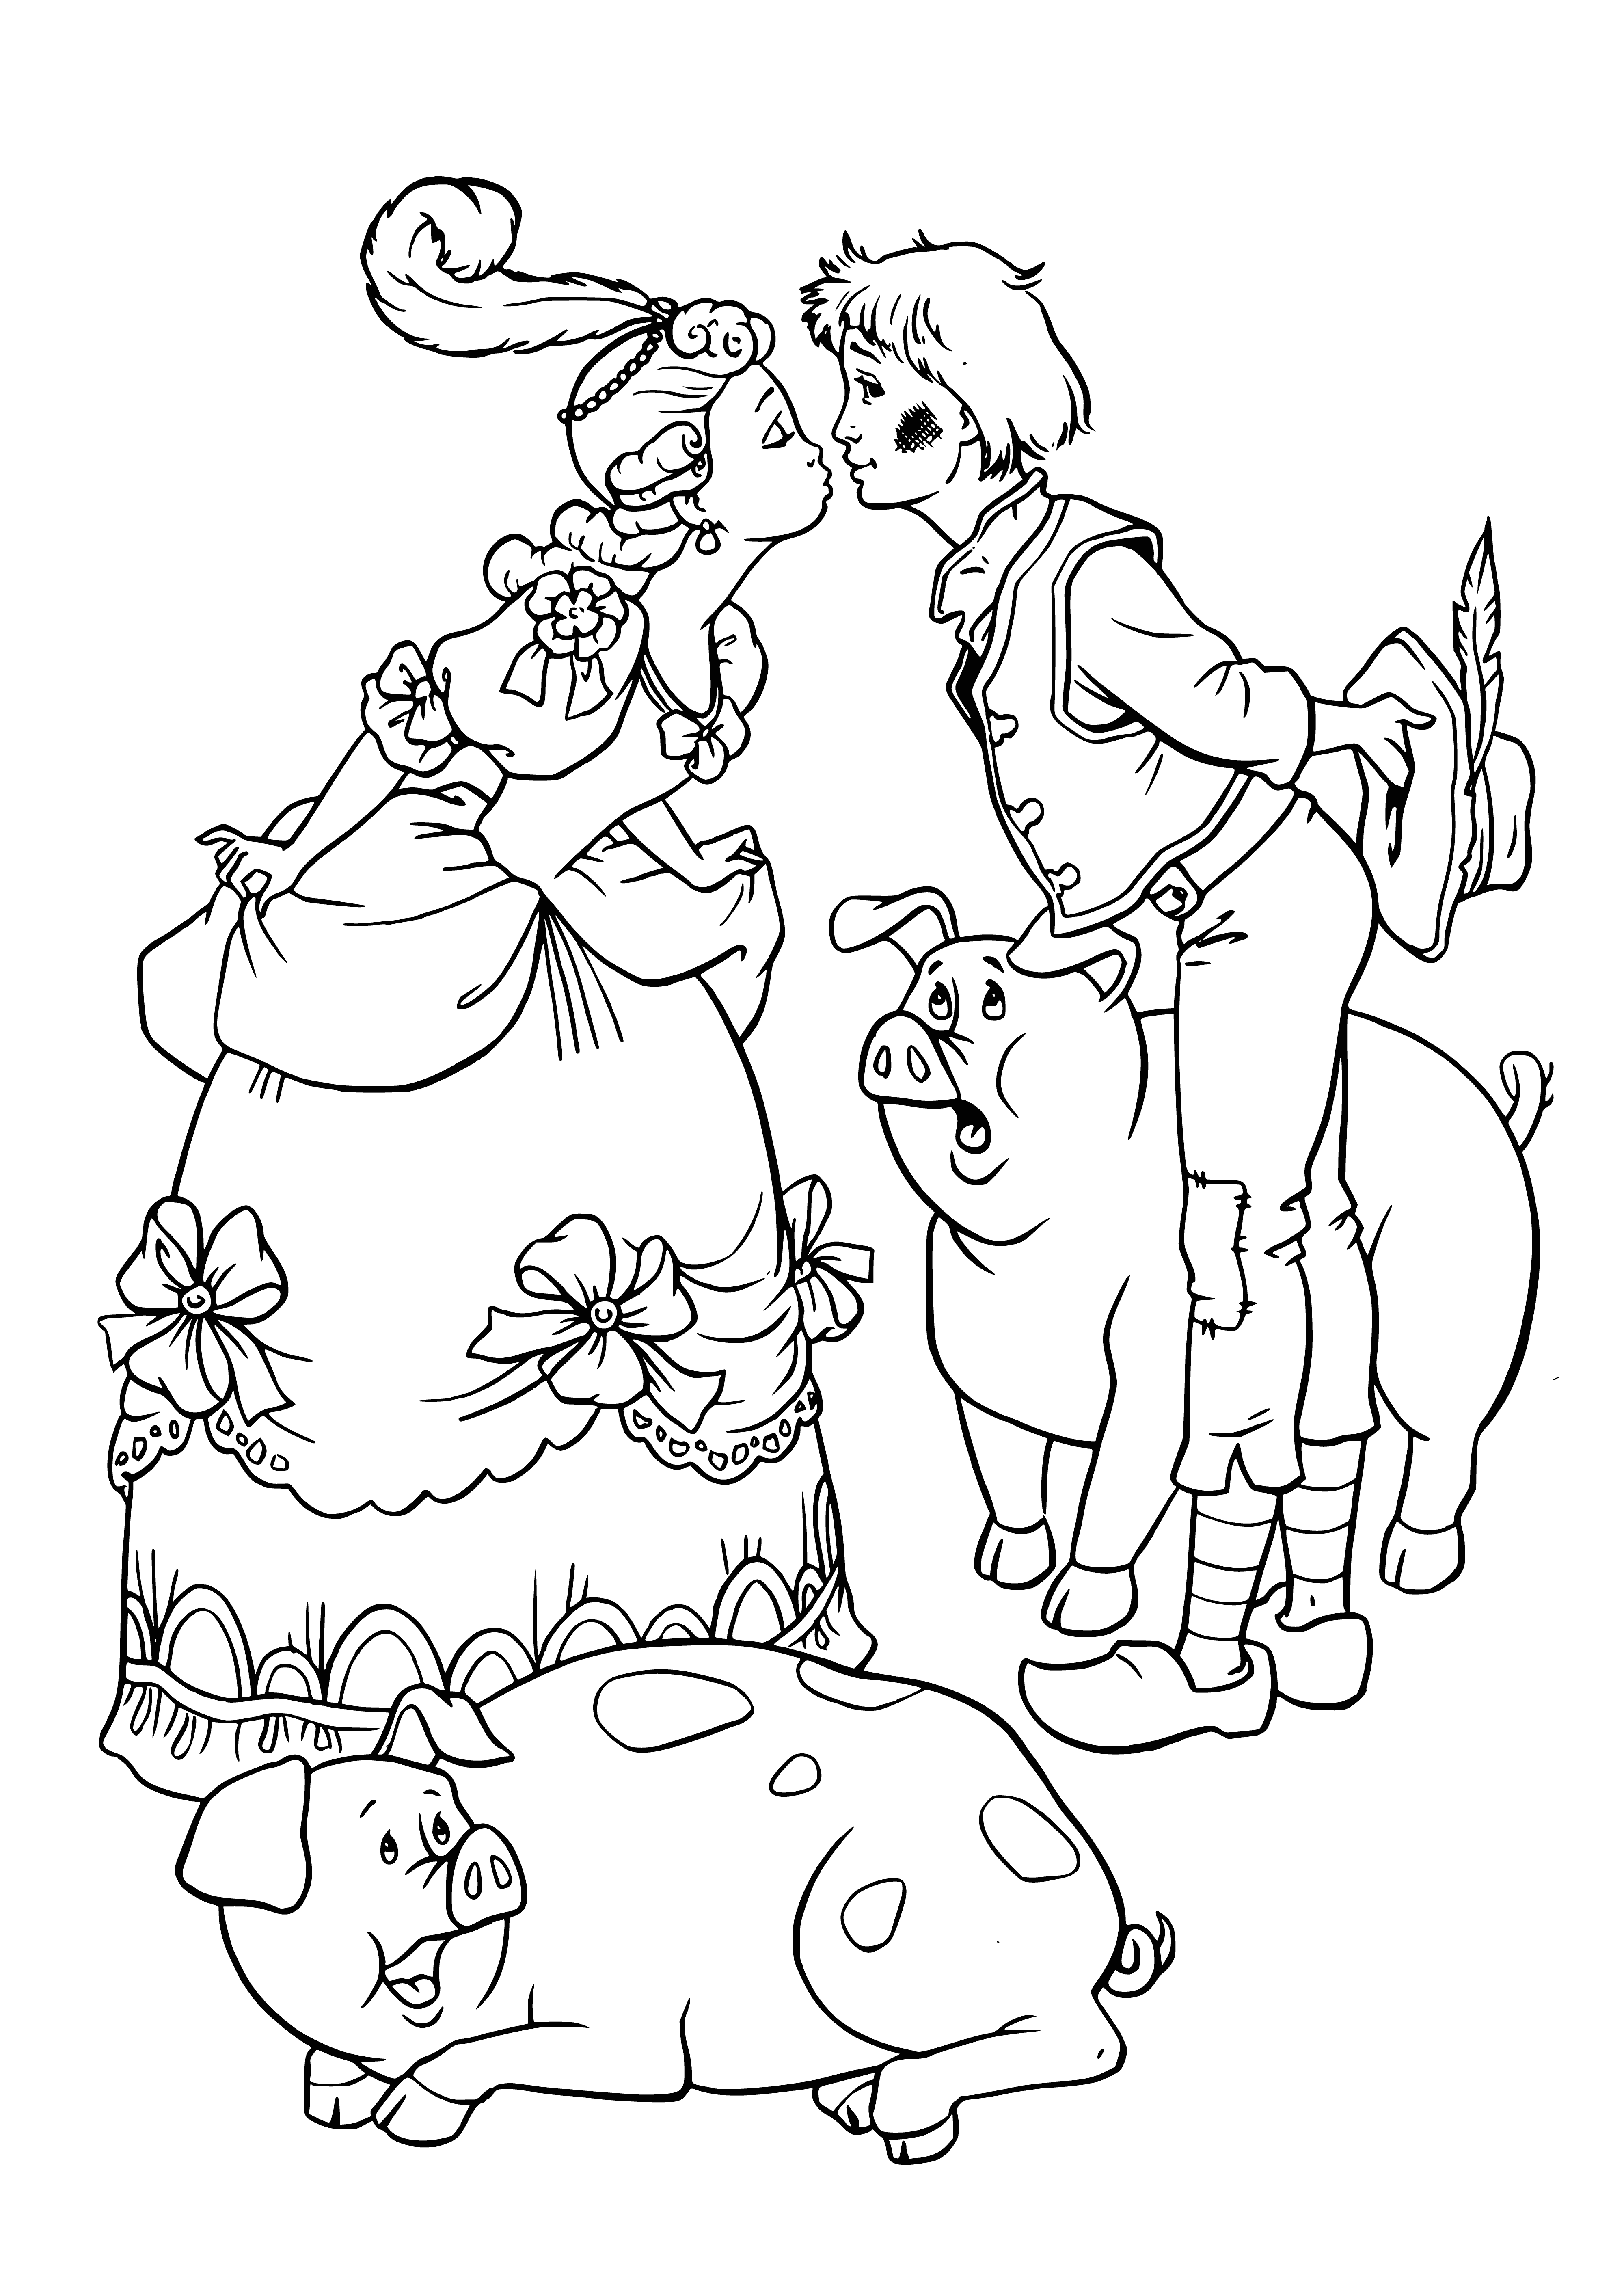 coloring page: Beautiful princess on a white horse & adoring swineherd in a castle backdrop. She wears a flowing pink dress & gold crown. #Fairytale